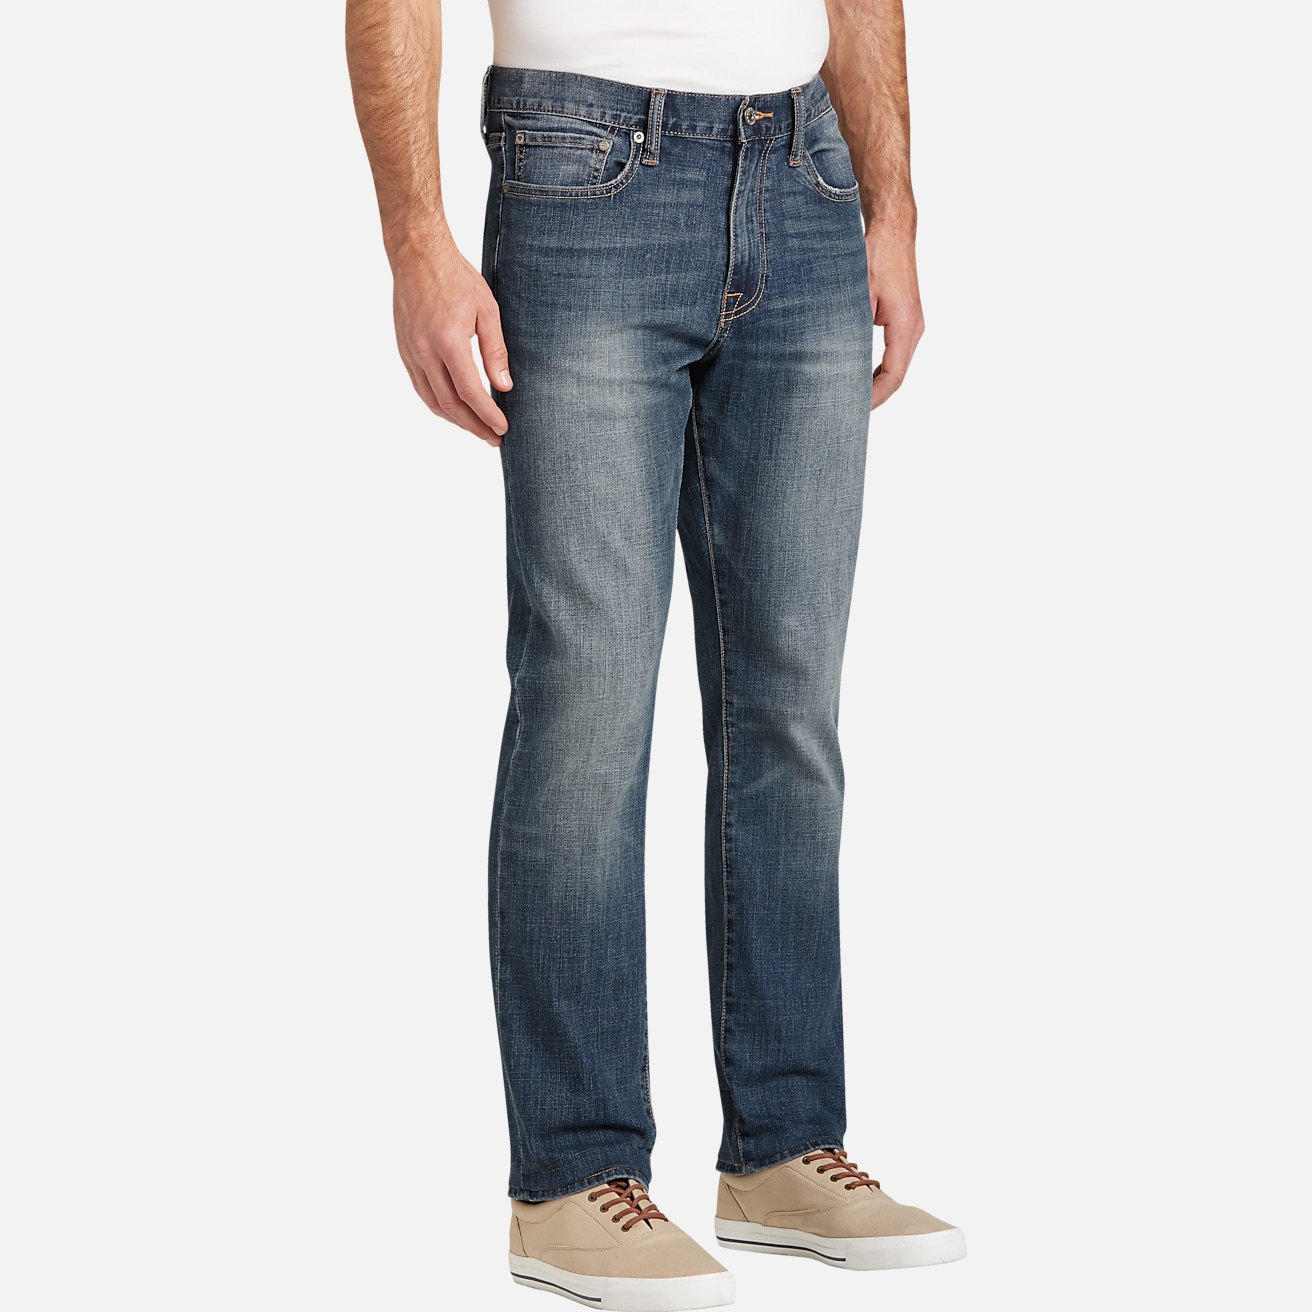 LUCKY BRAND 410 ATHELIC FIT ARCHED ROCK MEDIUM WASH